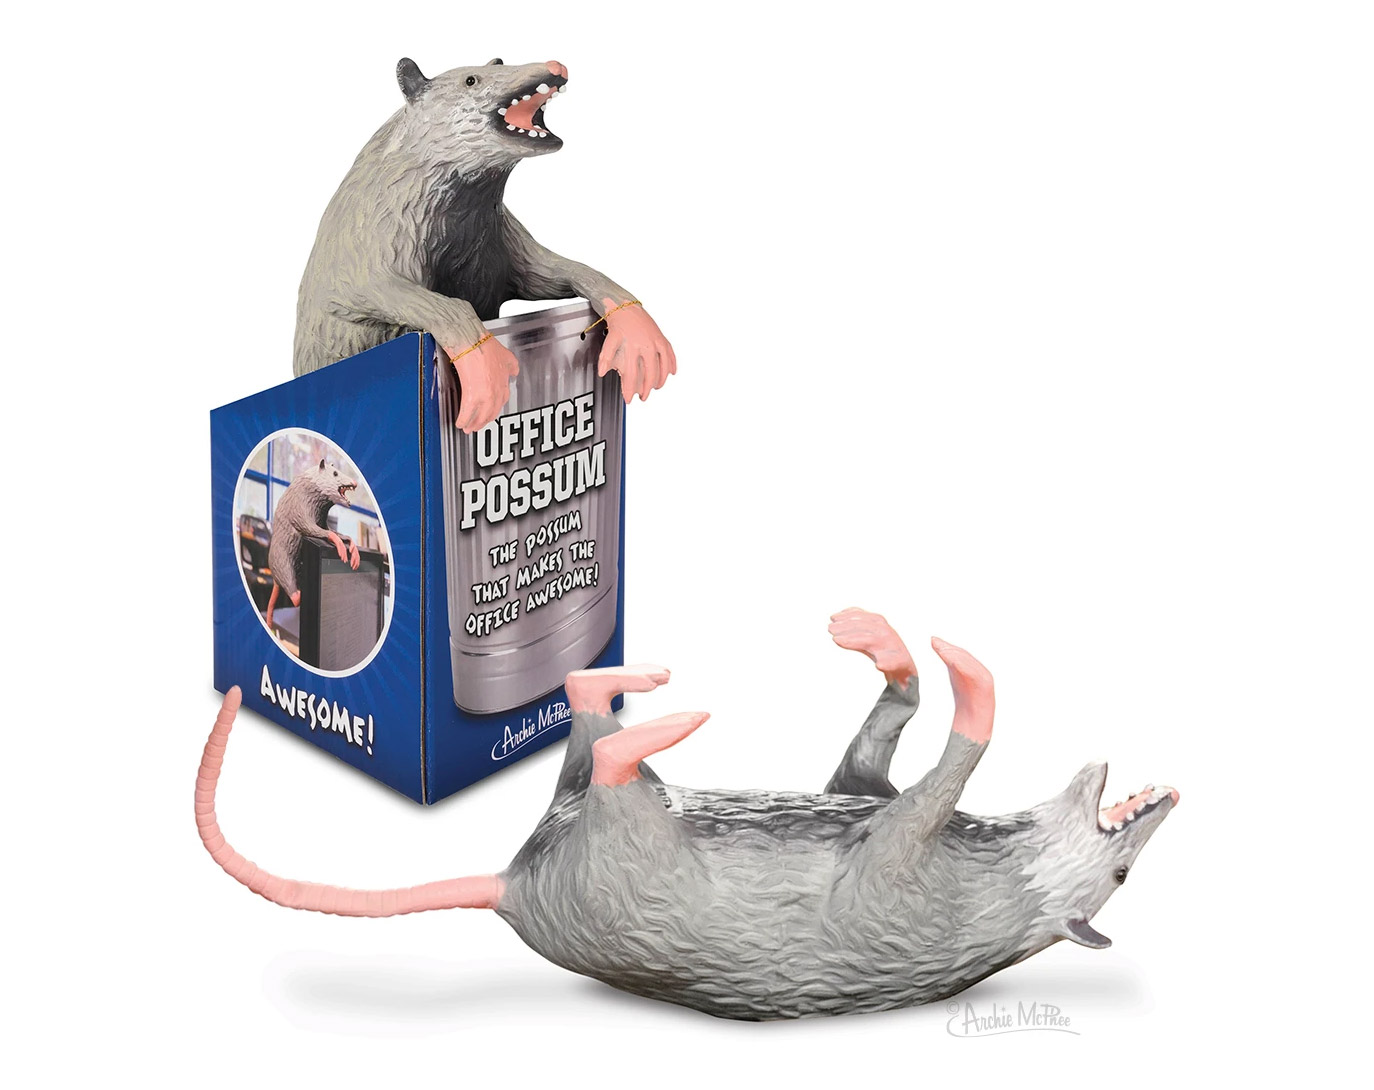 Fake office possum - Funny prank possum for the office trash can